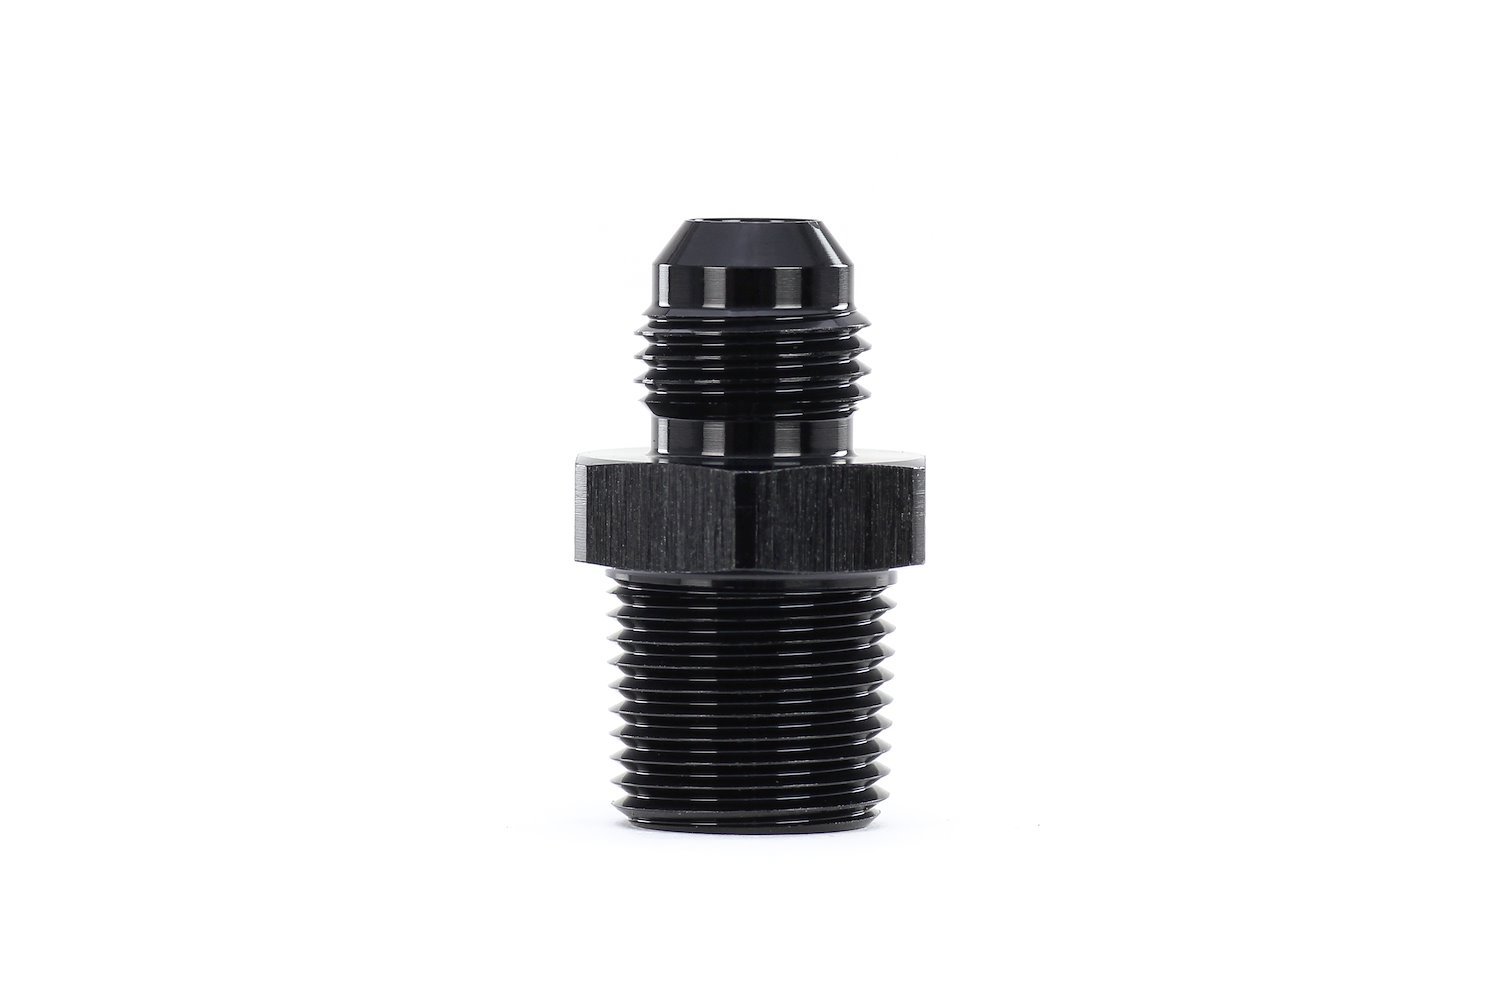 AN81688 AN Flare to NPT Straight Adapter, Convert from NPT Pipe Thread To An Flare